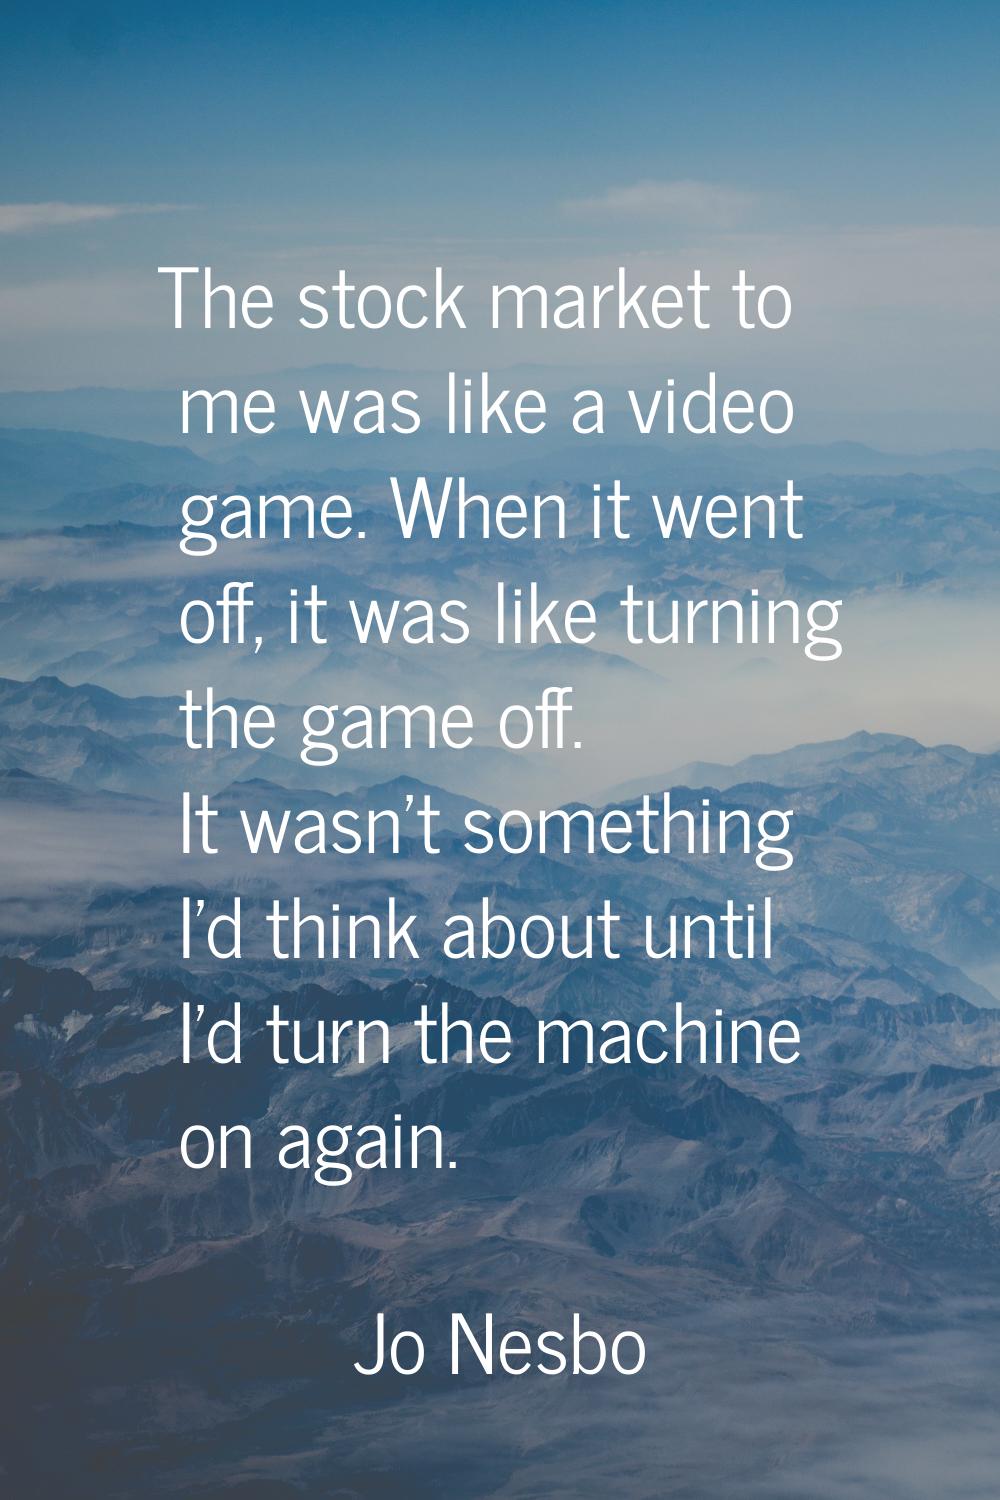 The stock market to me was like a video game. When it went off, it was like turning the game off. I